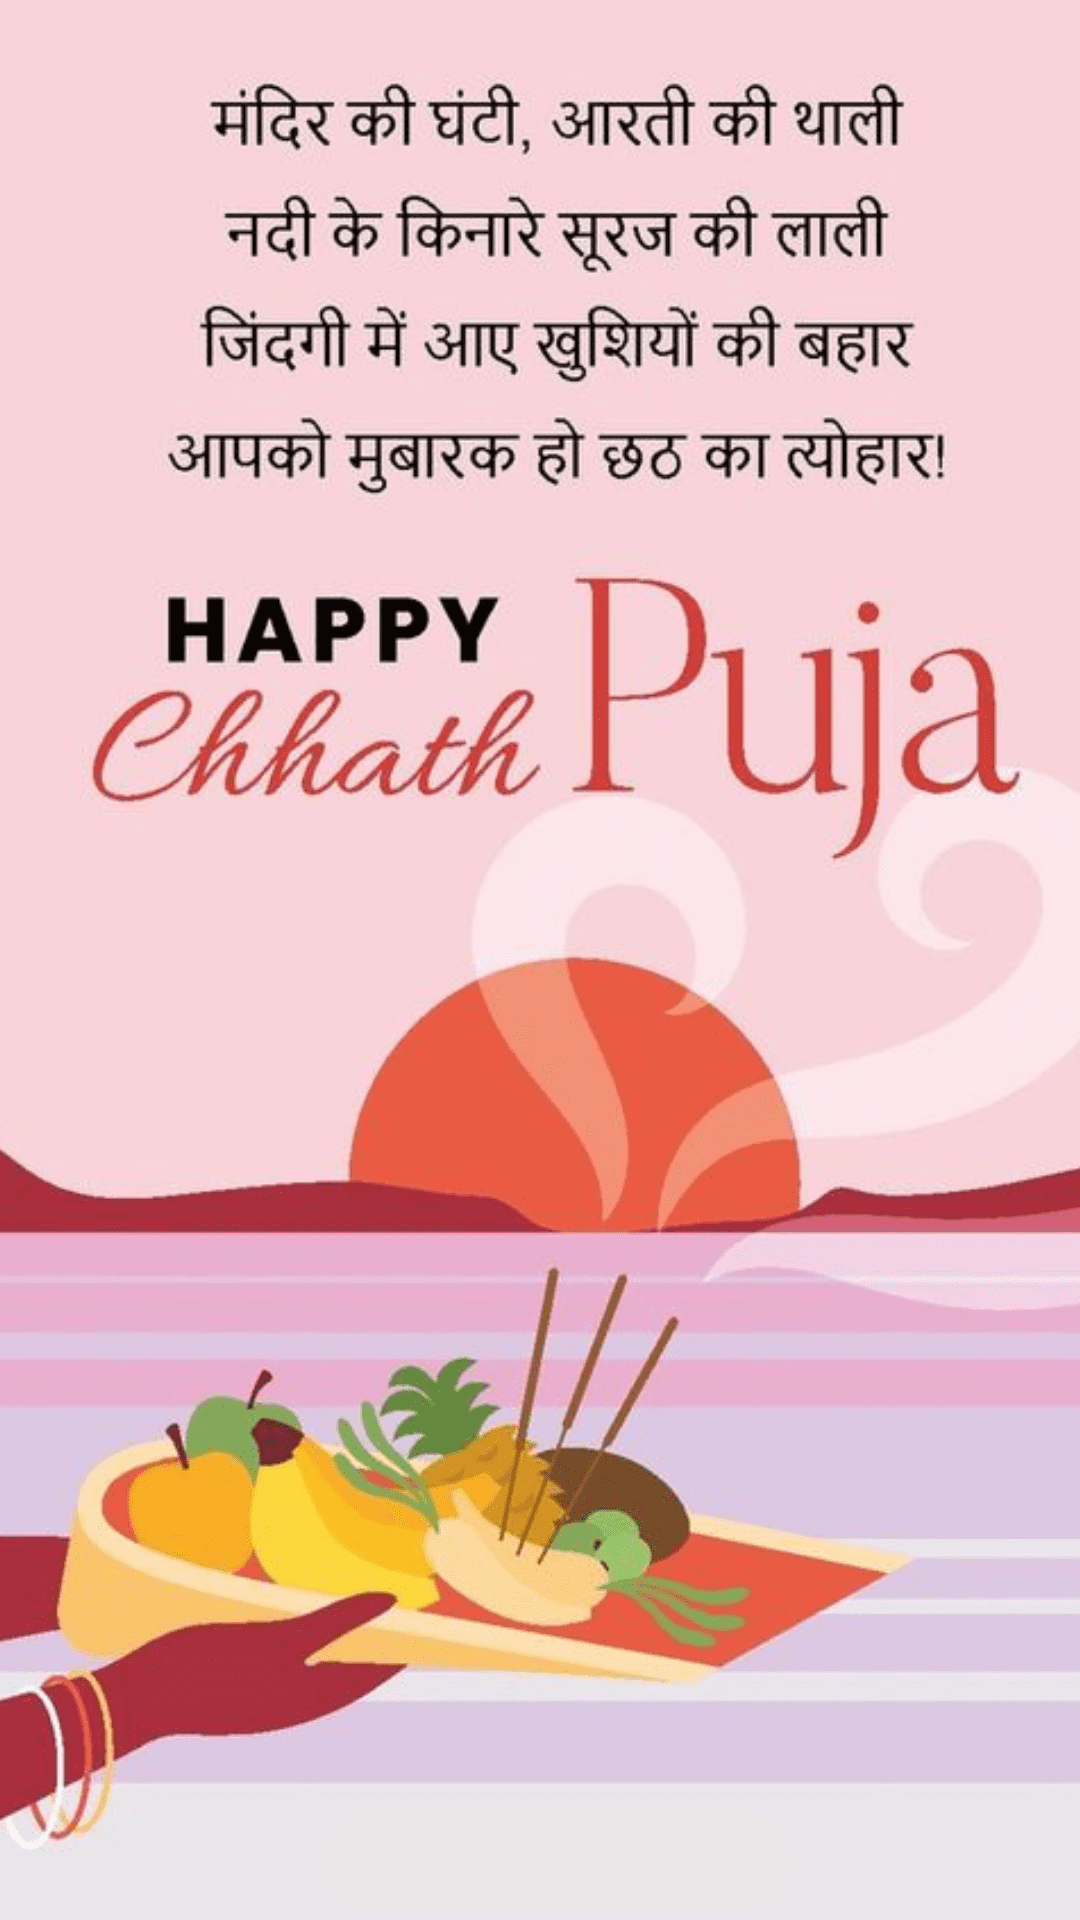 #{"id":2600,"_id":null,"name":"chhath-puja-status-in-hindi","count":0,"data":null,"deleted_at":null,"created_at":"2023-09-26T09:49:36.000000Z","updated_at":"2023-09-26T09:49:36.000000Z","merge_with":null,"pivot":{"taggable_id":2426,"tag_id":2600,"taggable_type":"App\\Models\\Status"}}, #{"id":2601,"_id":null,"name":"chhath-puja-quotes-in-hindi","count":0,"data":null,"deleted_at":null,"created_at":"2023-09-26T09:49:36.000000Z","updated_at":"2023-09-26T09:49:36.000000Z","merge_with":null,"pivot":{"taggable_id":2426,"tag_id":2601,"taggable_type":"App\\Models\\Status"}}, #{"id":2599,"_id":null,"name":"chhath-puja-whatsapp-status","count":0,"data":null,"deleted_at":null,"created_at":"2023-09-26T09:40:01.000000Z","updated_at":"2023-09-26T09:40:01.000000Z","merge_with":null,"pivot":{"taggable_id":2426,"tag_id":2599,"taggable_type":"App\\Models\\Status"}}, #{"id":2602,"_id":null,"name":"chhath-puja-status-in-hindi-for-whatsapp-facebook","count":0,"data":null,"deleted_at":null,"created_at":"2023-09-26T09:49:36.000000Z","updated_at":"2023-09-26T09:49:36.000000Z","merge_with":null,"pivot":{"taggable_id":2426,"tag_id":2602,"taggable_type":"App\\Models\\Status"}}, #{"id":263,"_id":"61f3f785e0f744570541c136","name":"wishes-for-chhath-puja-in-hindi","count":18,"data":"{\"_id\":{\"$oid\":\"61f3f785e0f744570541c136\"},\"id\":\"237\",\"name\":\"wishes-for-chhath-puja-in-hindi\",\"created_at\":\"2020-11-18-11:34:25\",\"updated_at\":\"2020-11-18-11:34:25\",\"updatedAt\":{\"$date\":\"2022-01-28T14:33:44.898Z\"},\"count\":18}","deleted_at":null,"created_at":"2020-11-18T11:34:25.000000Z","updated_at":"2020-11-18T11:34:25.000000Z","merge_with":null,"pivot":{"taggable_id":2426,"tag_id":263,"taggable_type":"App\\Models\\Status"}}